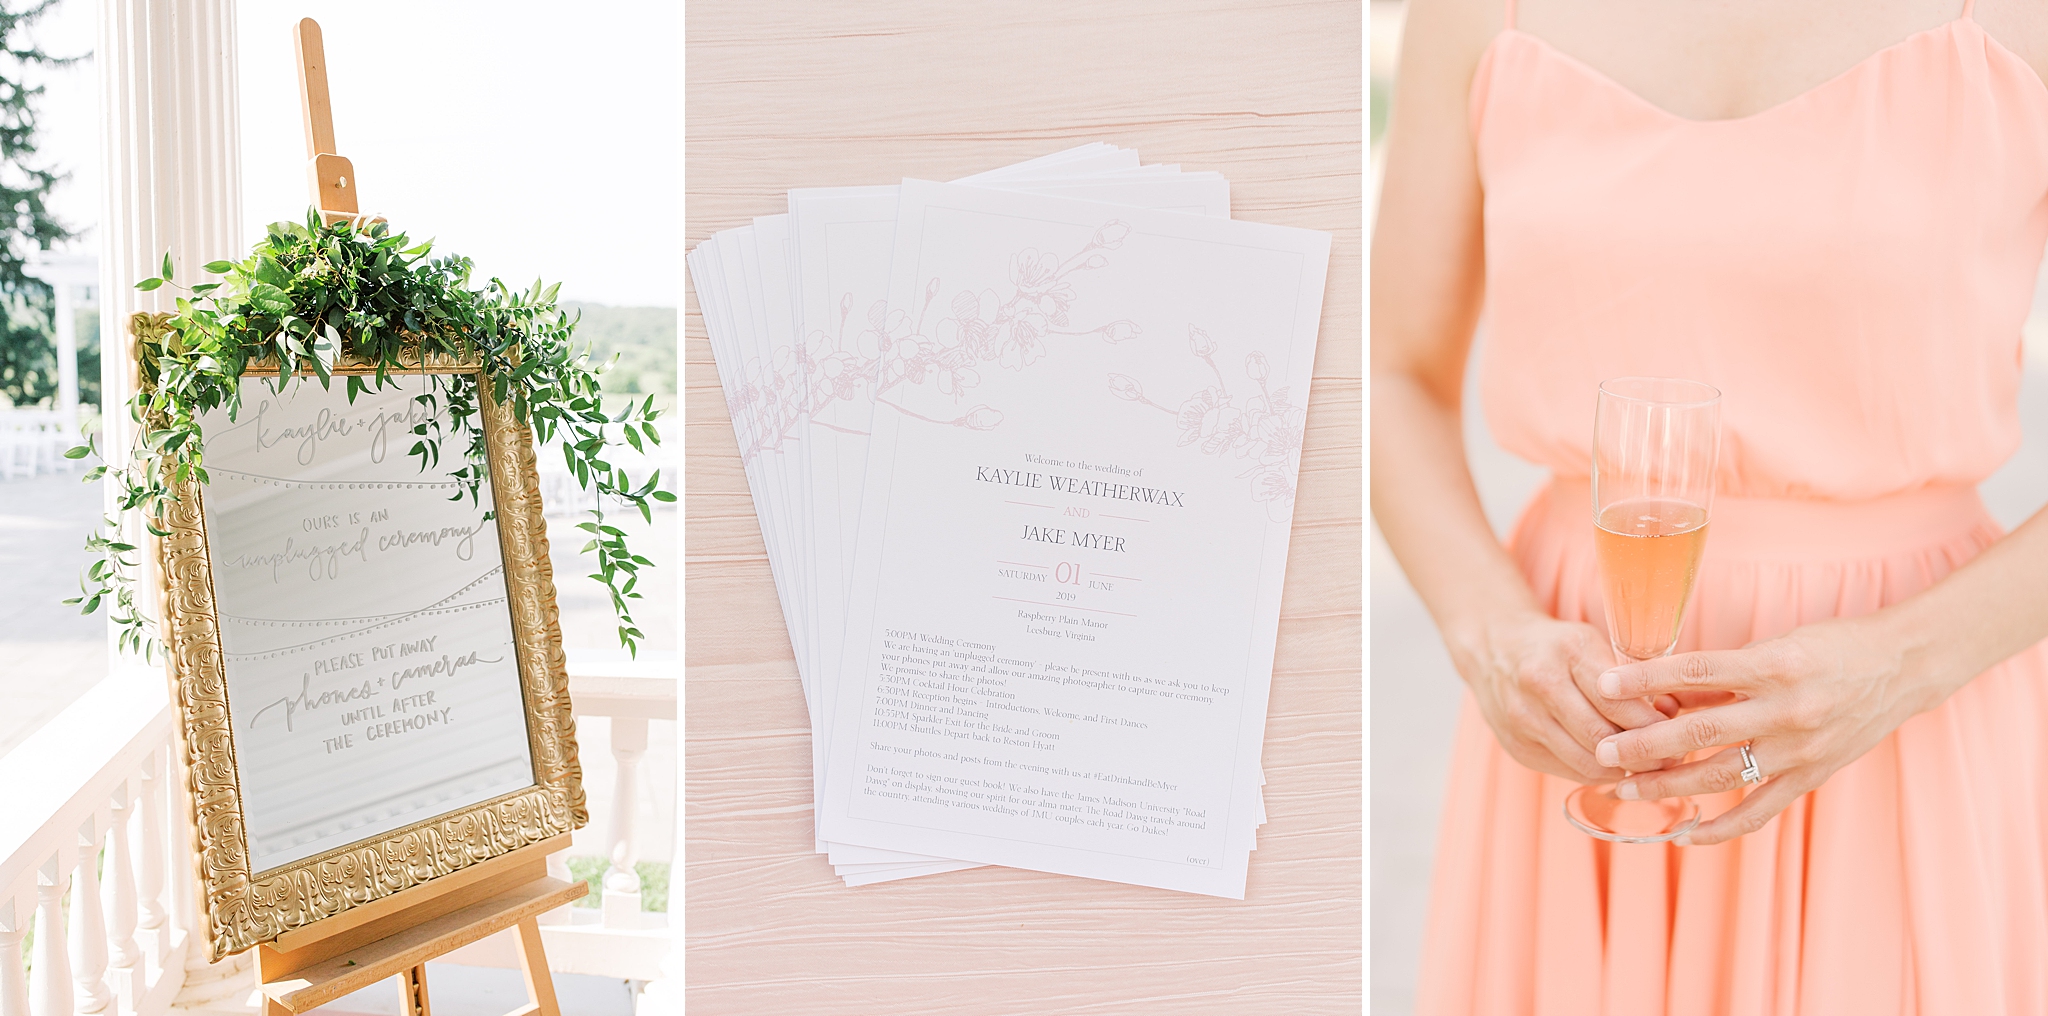 A summer wedding at Raspberry Plain Manor in Leesburg, VA featuring a cream and gold color palette with pops of greenery.